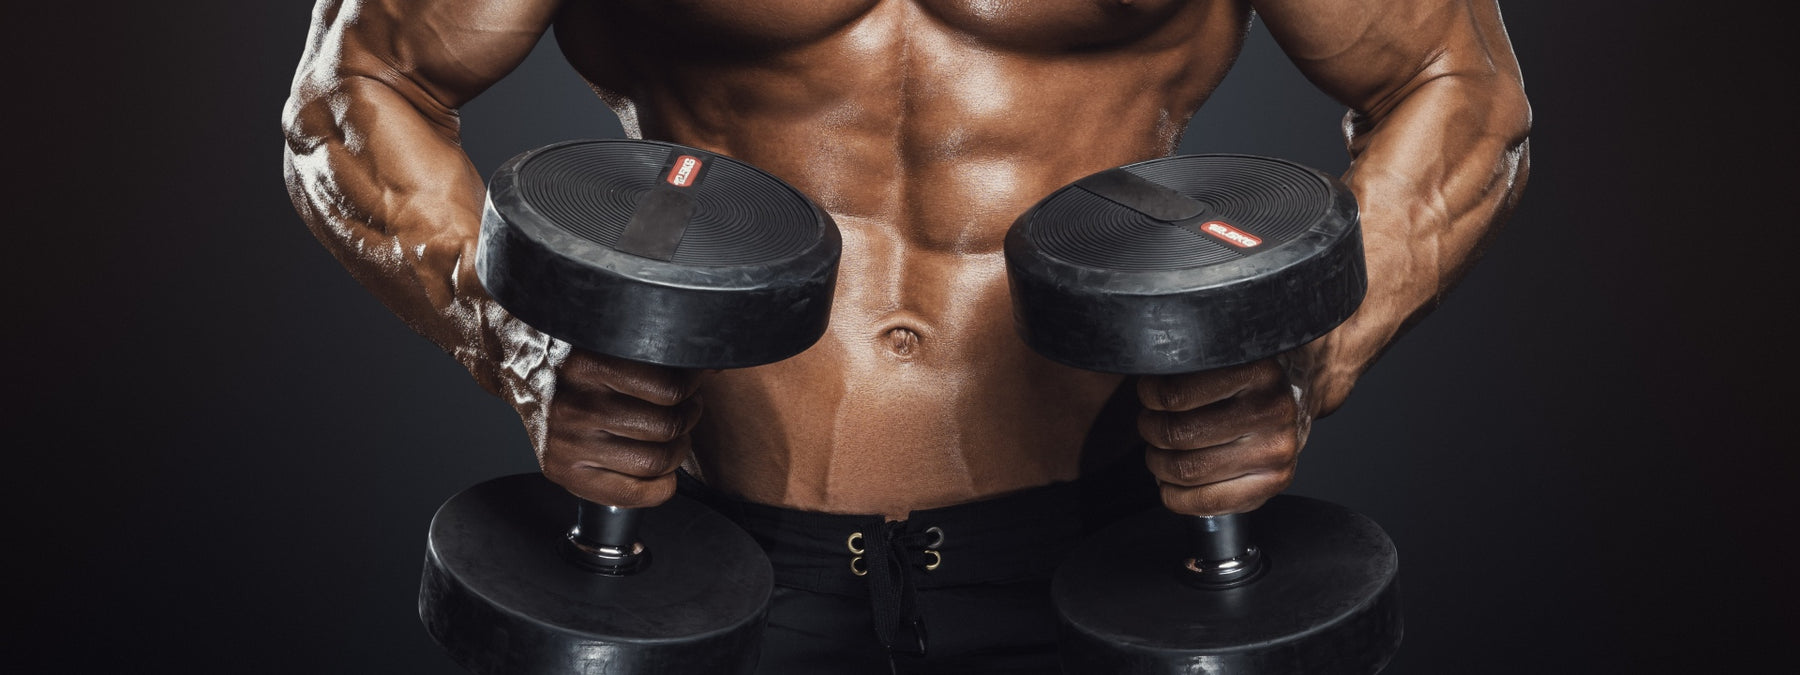 Three Blistering Dumbbell Workouts You Can Do In 30 Minutes